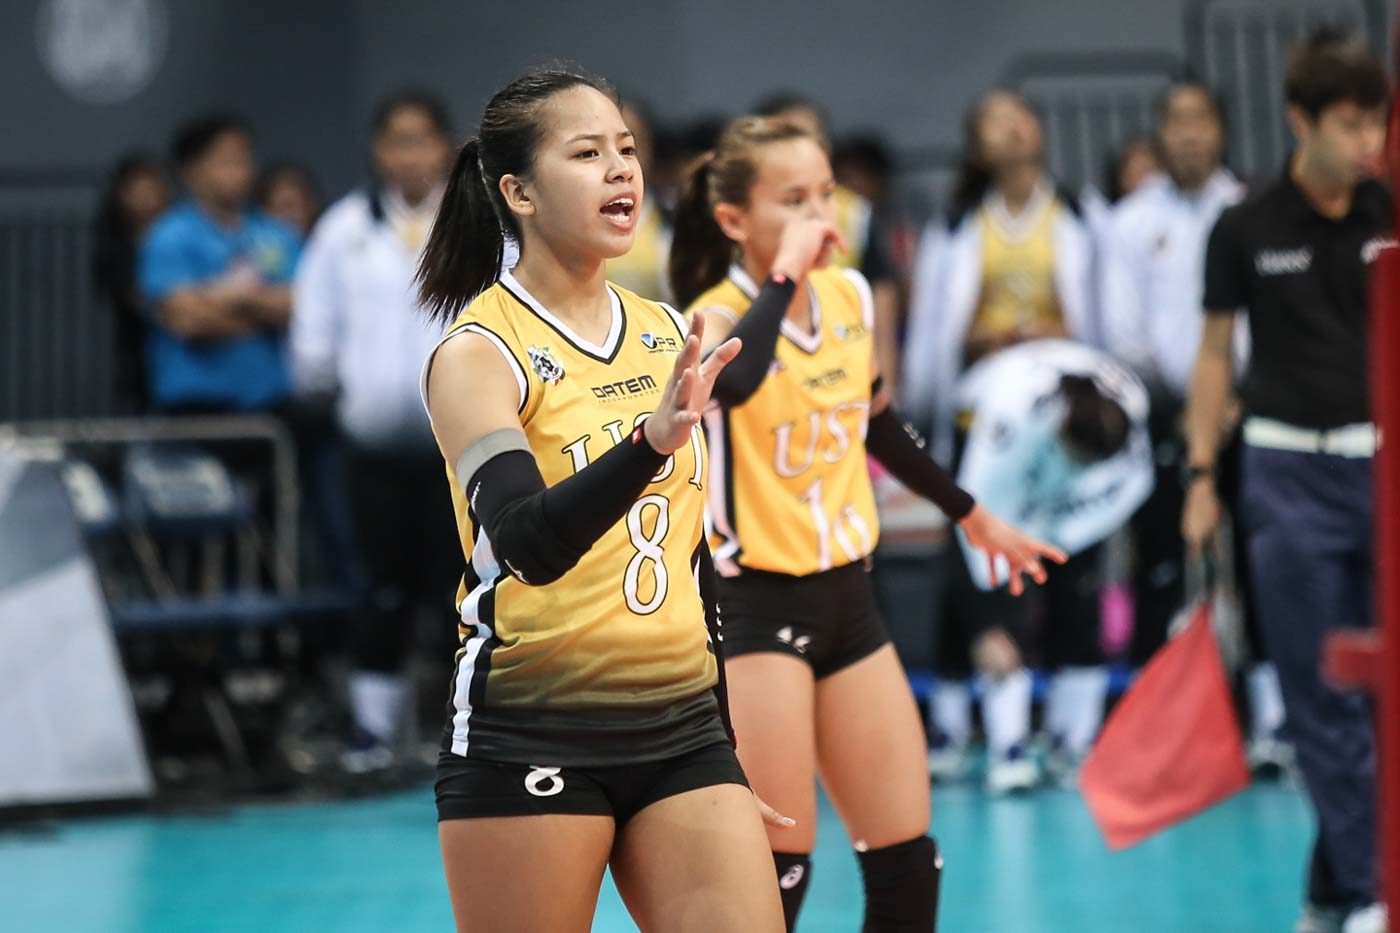 UST’s Eya Laure rises to occasion, bags UAAP Player of the Week